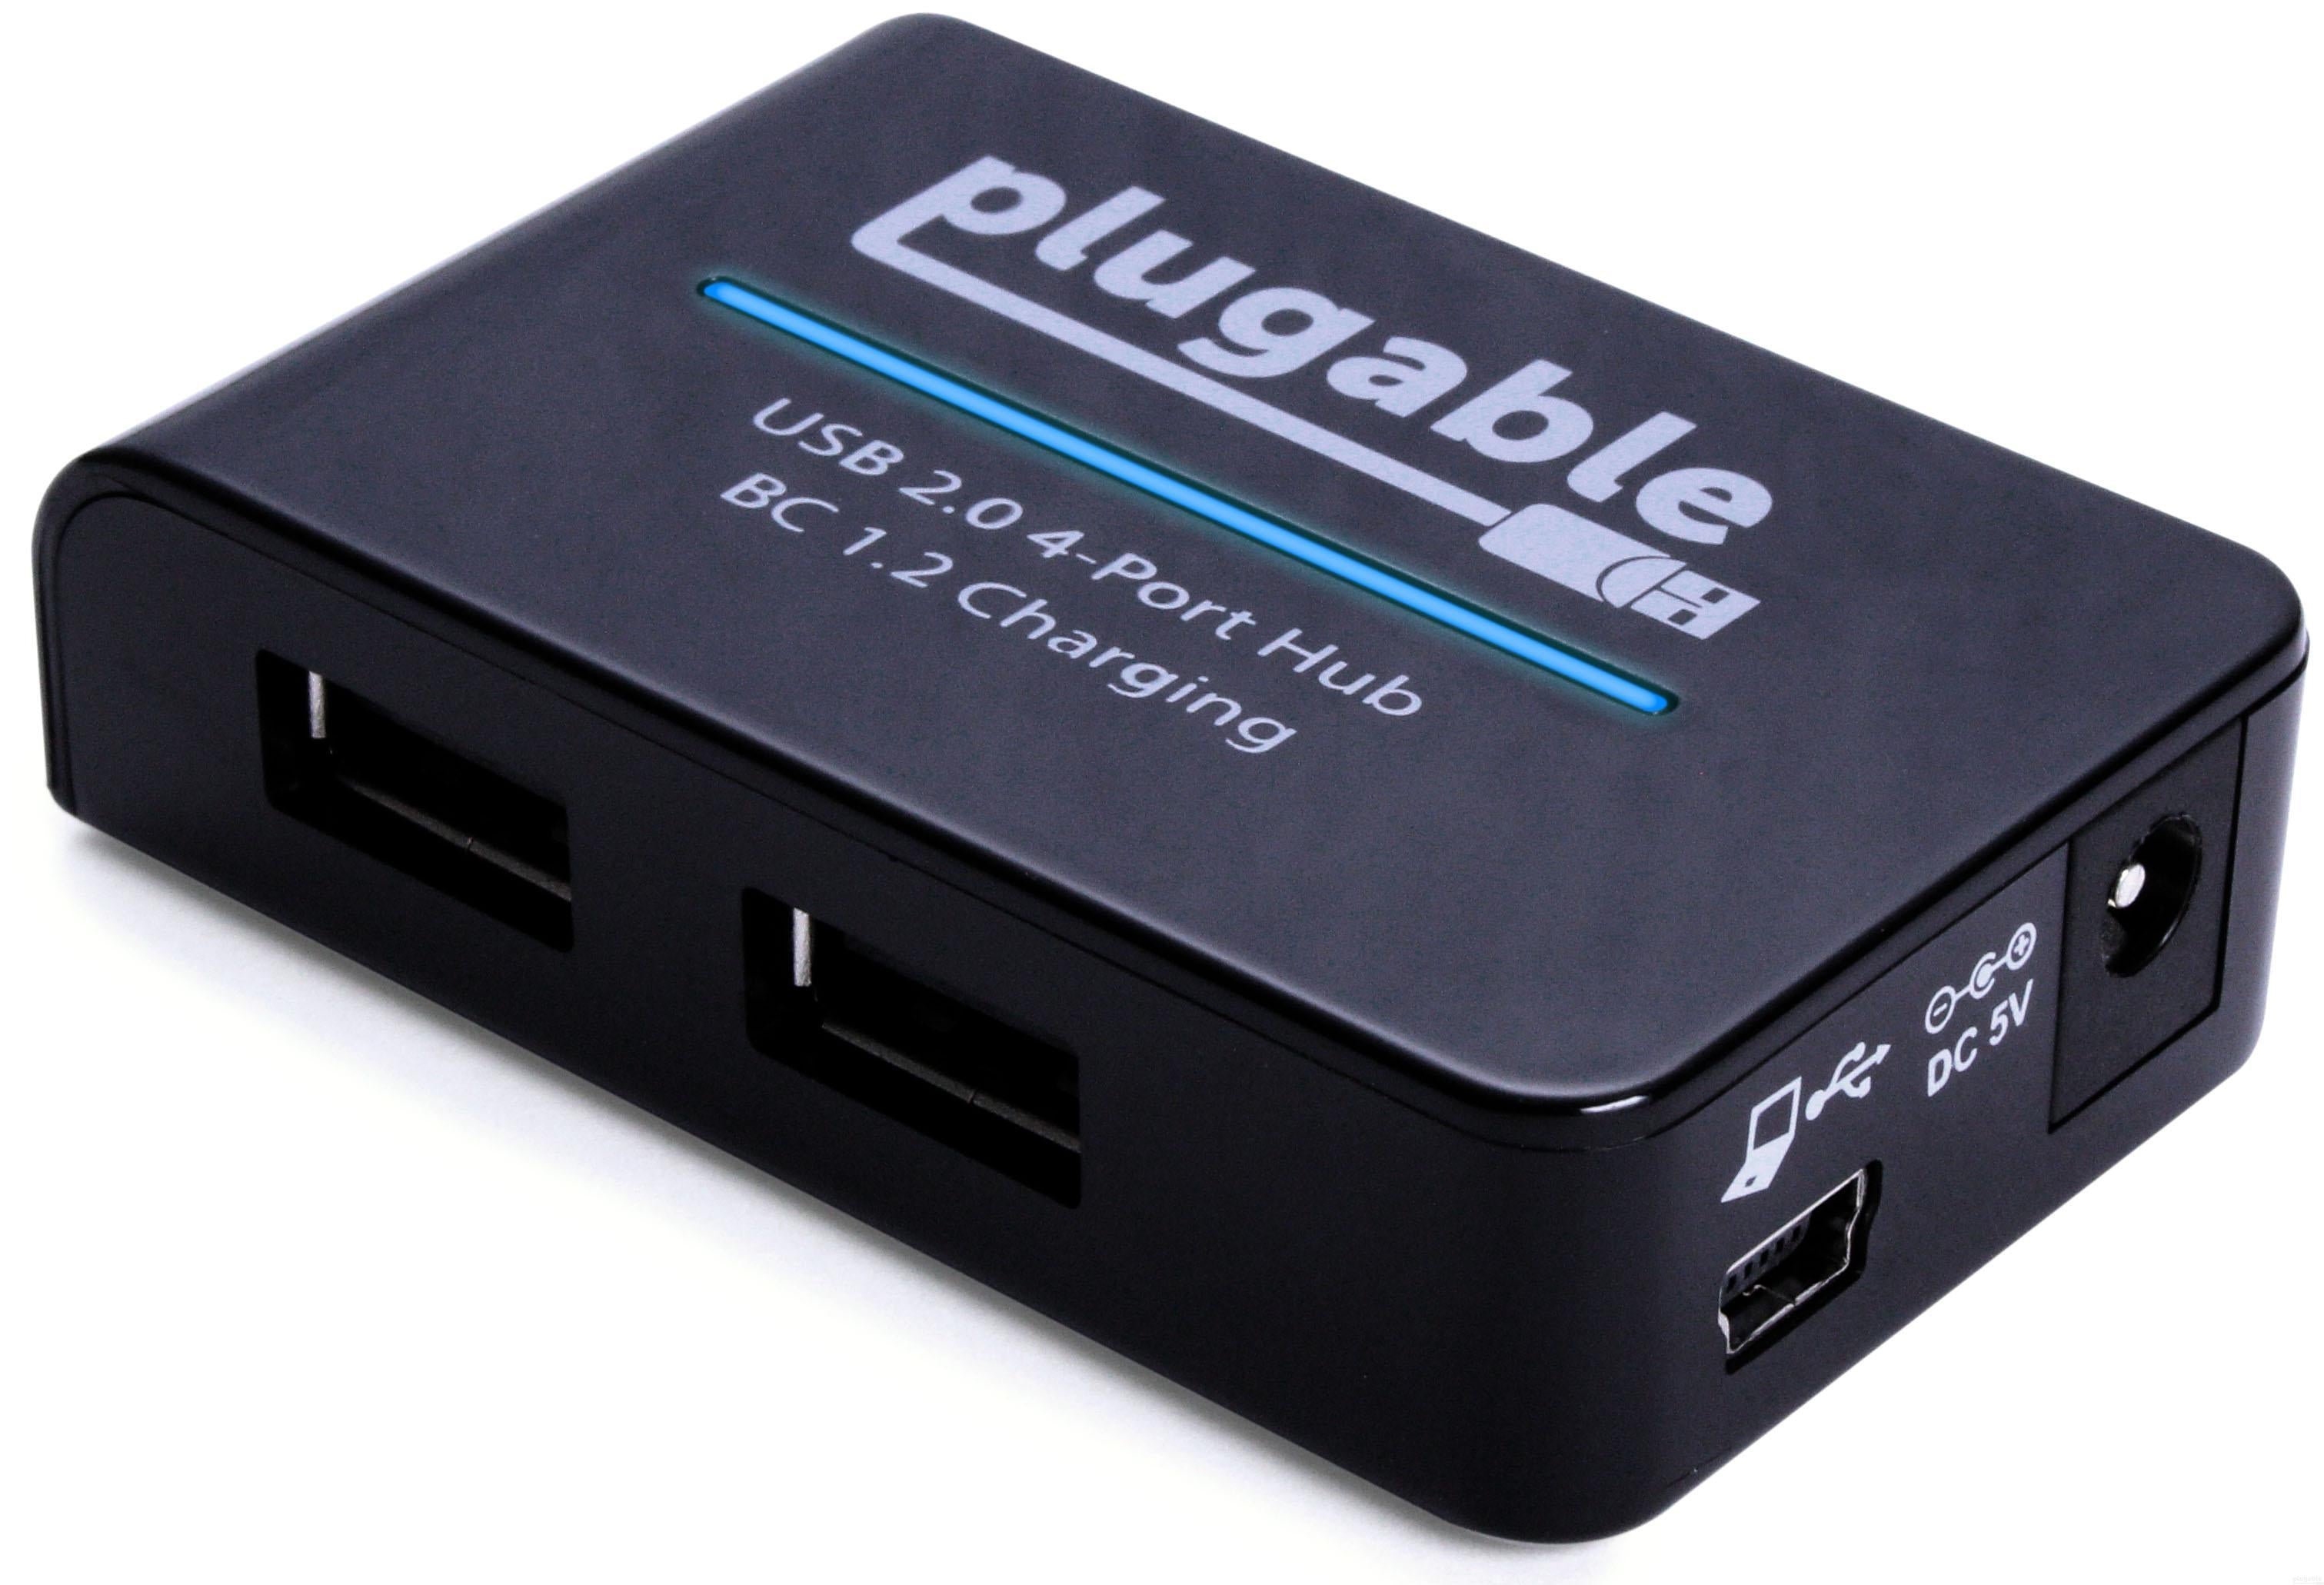 Ydmyge Pensioneret rådgive Plugable USB 2.0 4-Port Hub with 12.5W Power Adapter with BC 1.2 Charg –  Plugable Technologies